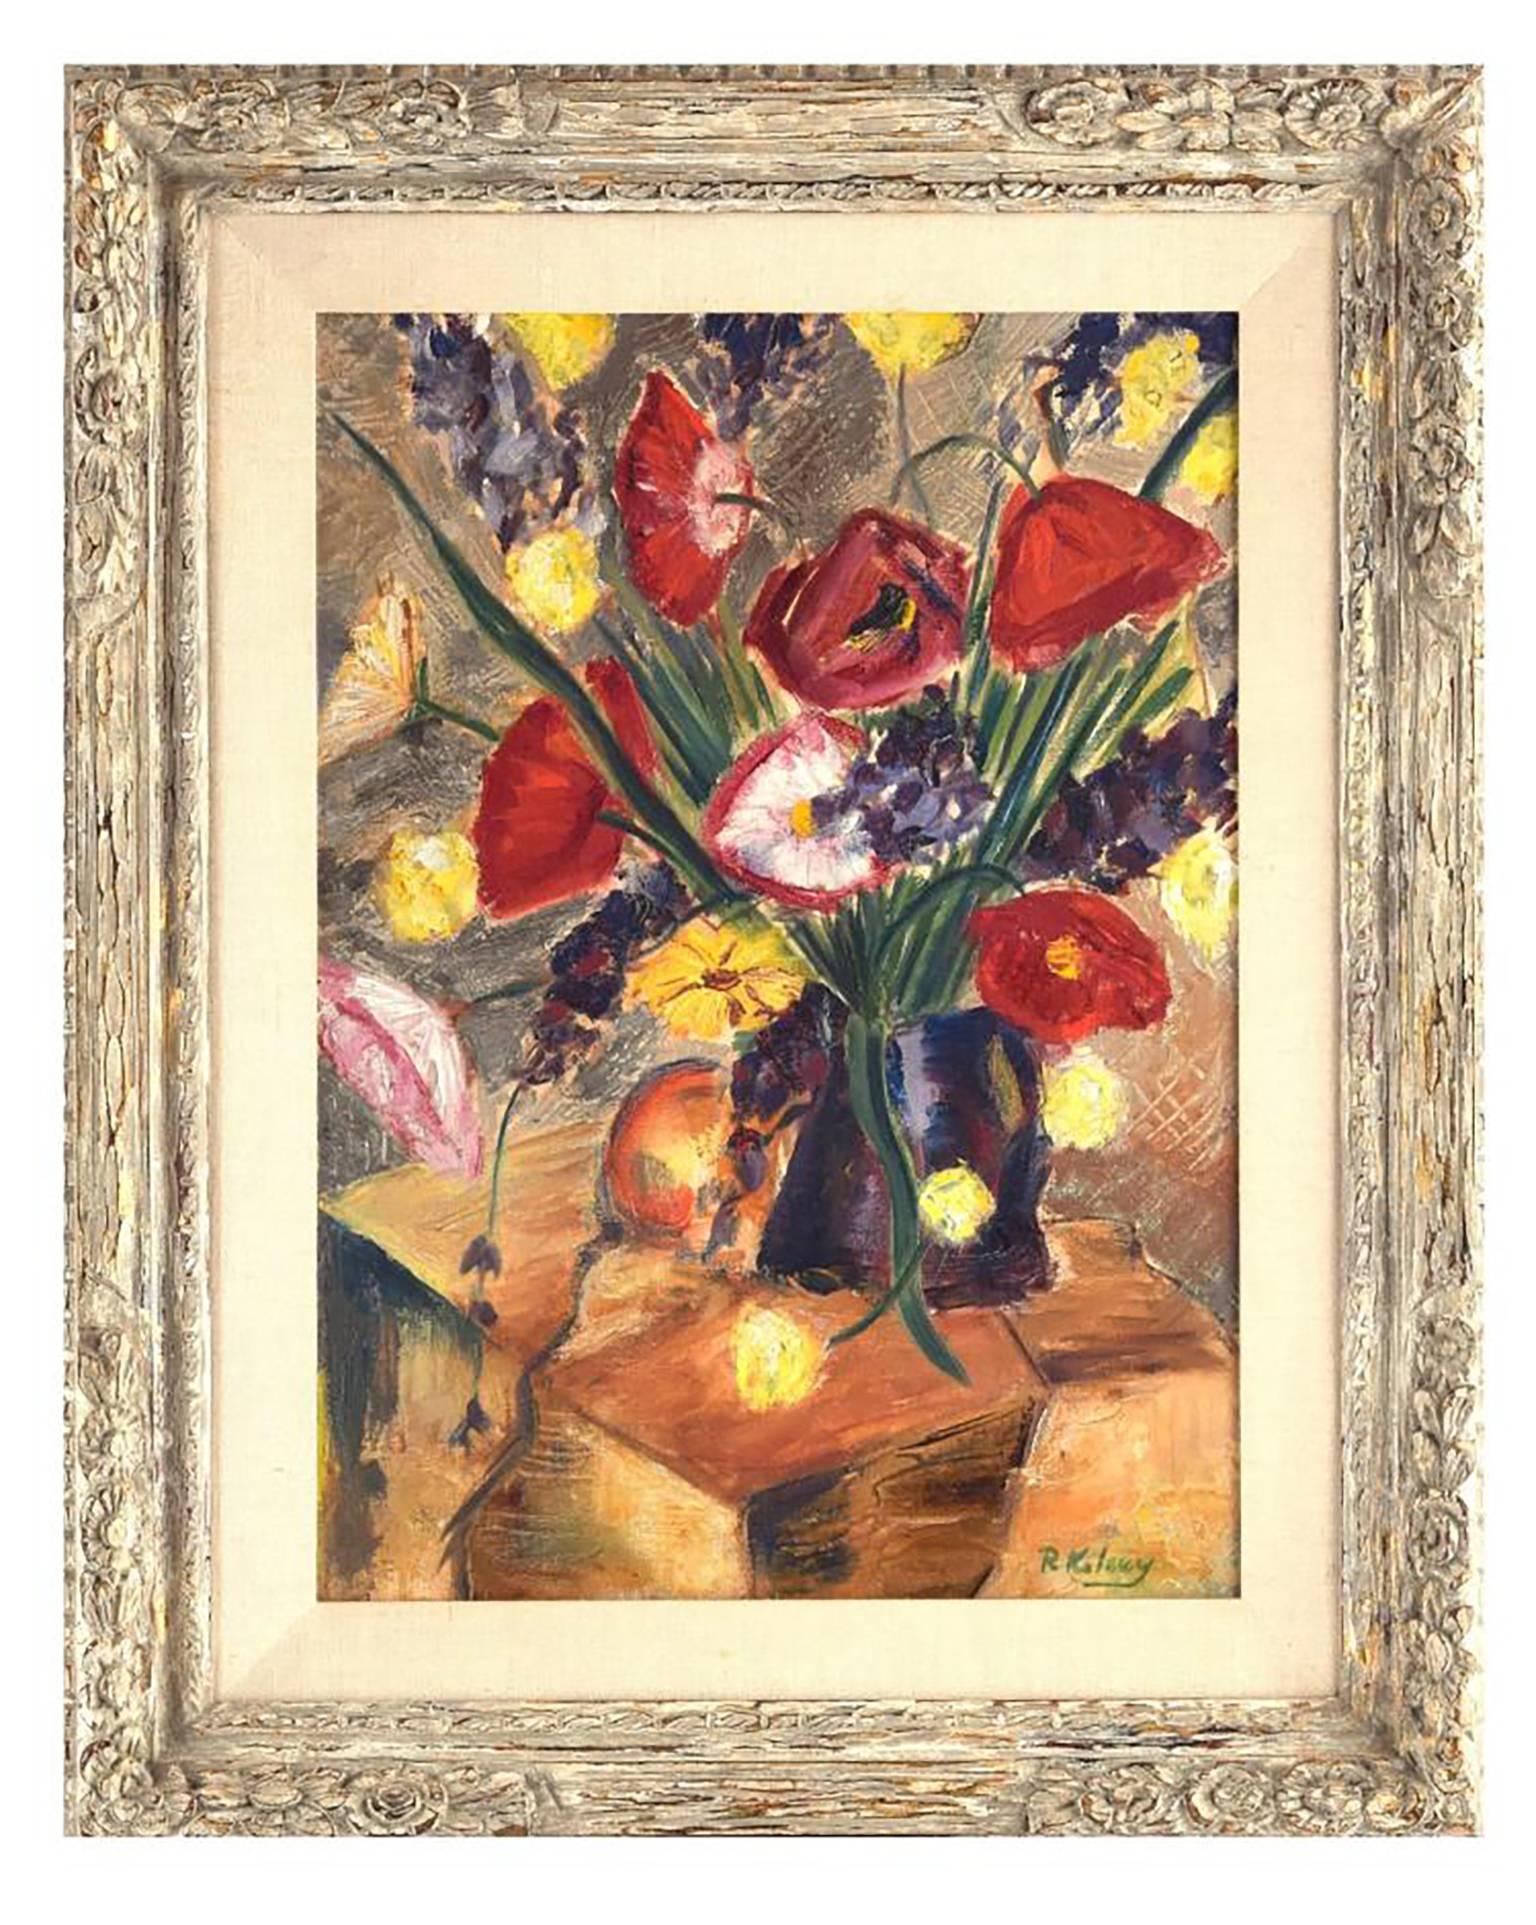 Unknown Still-Life Painting - Beautiful Floral Still Life Painting by Robert Kelsey